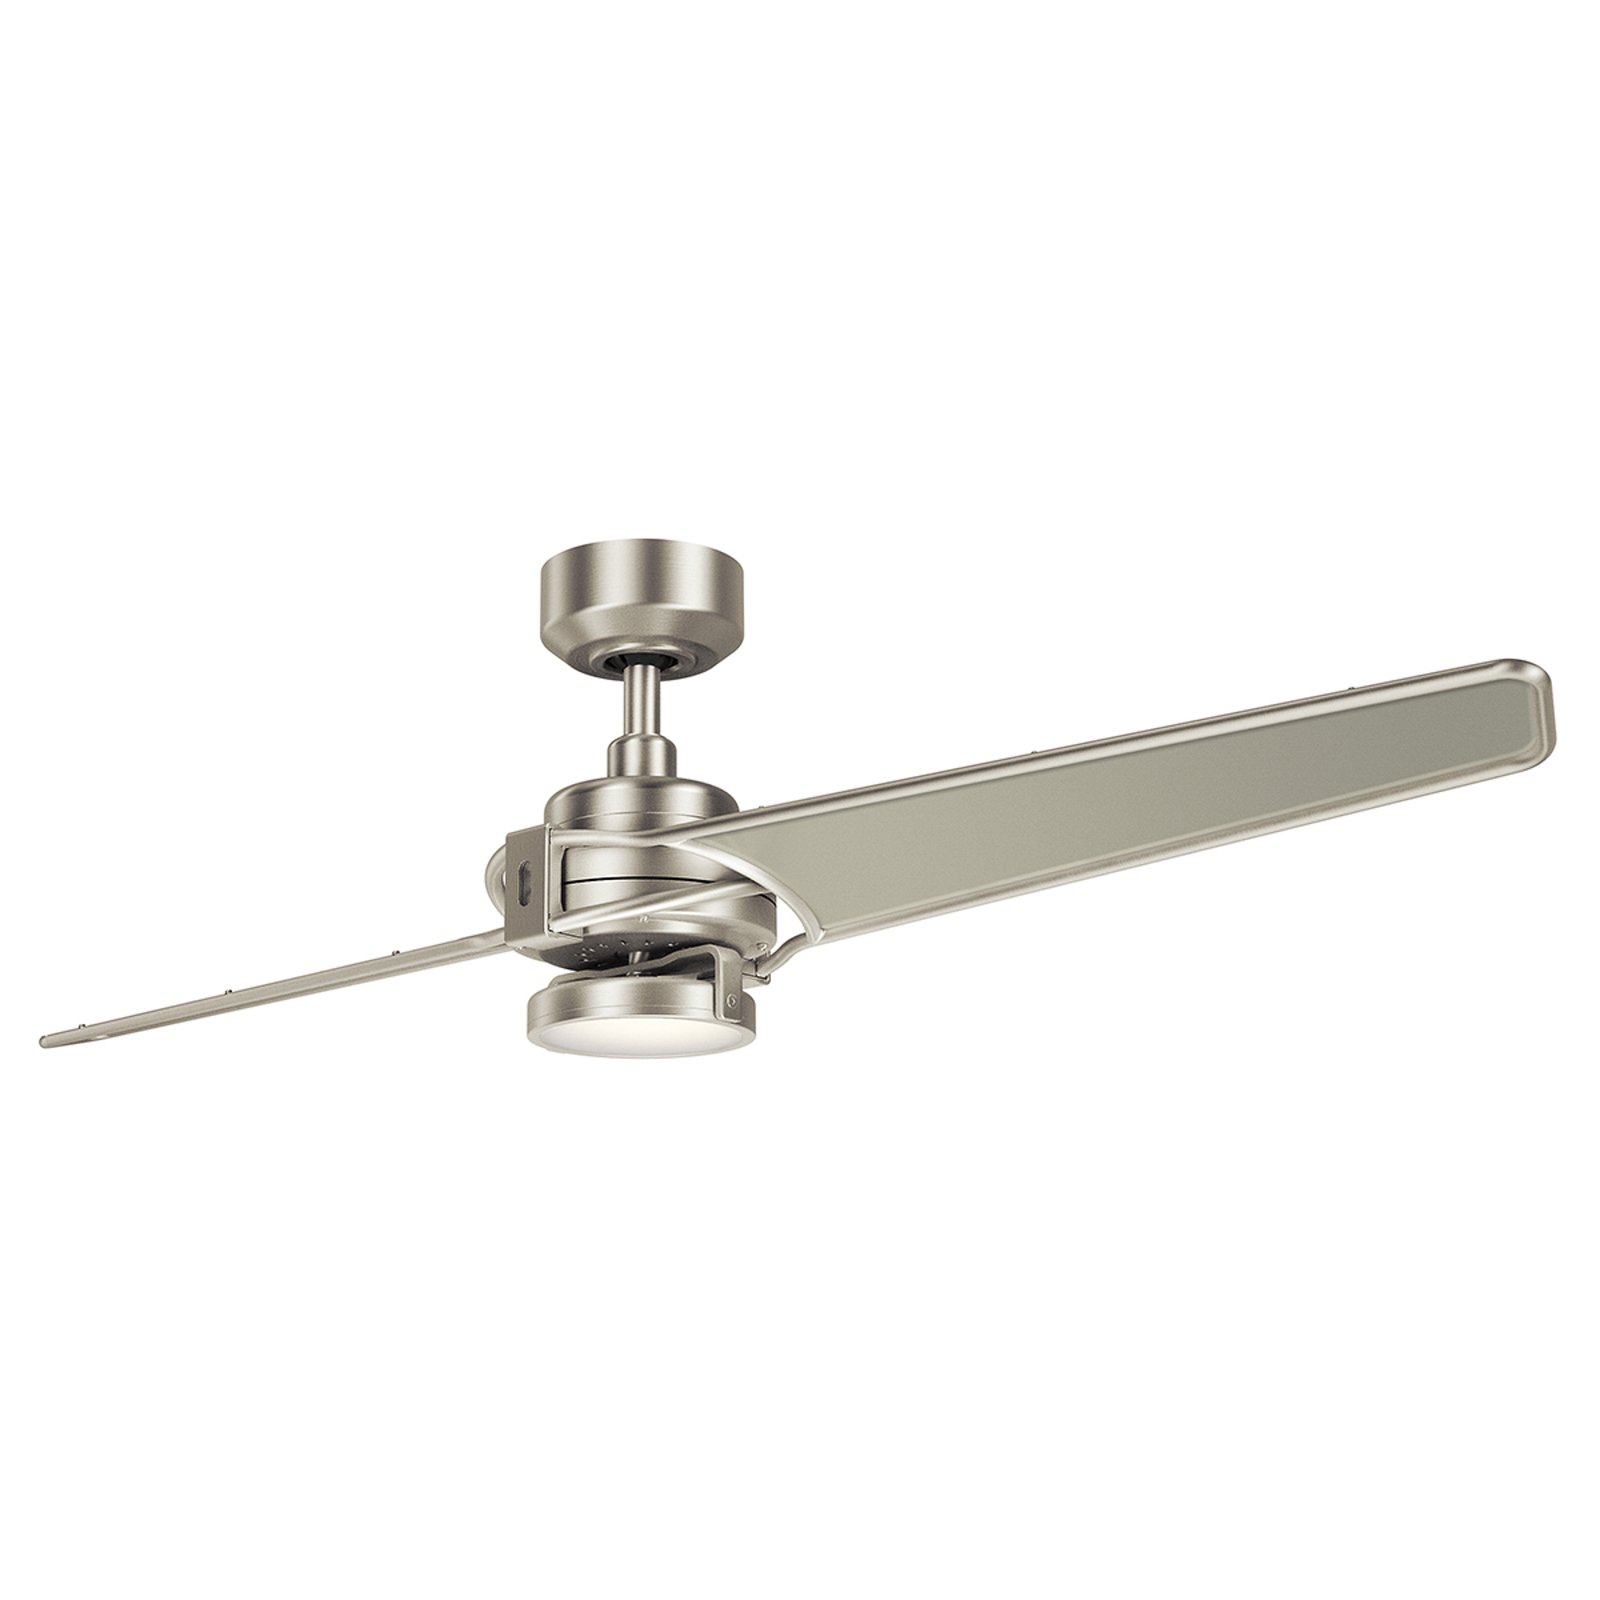 Xety LED ceiling fan, nickel/champagne